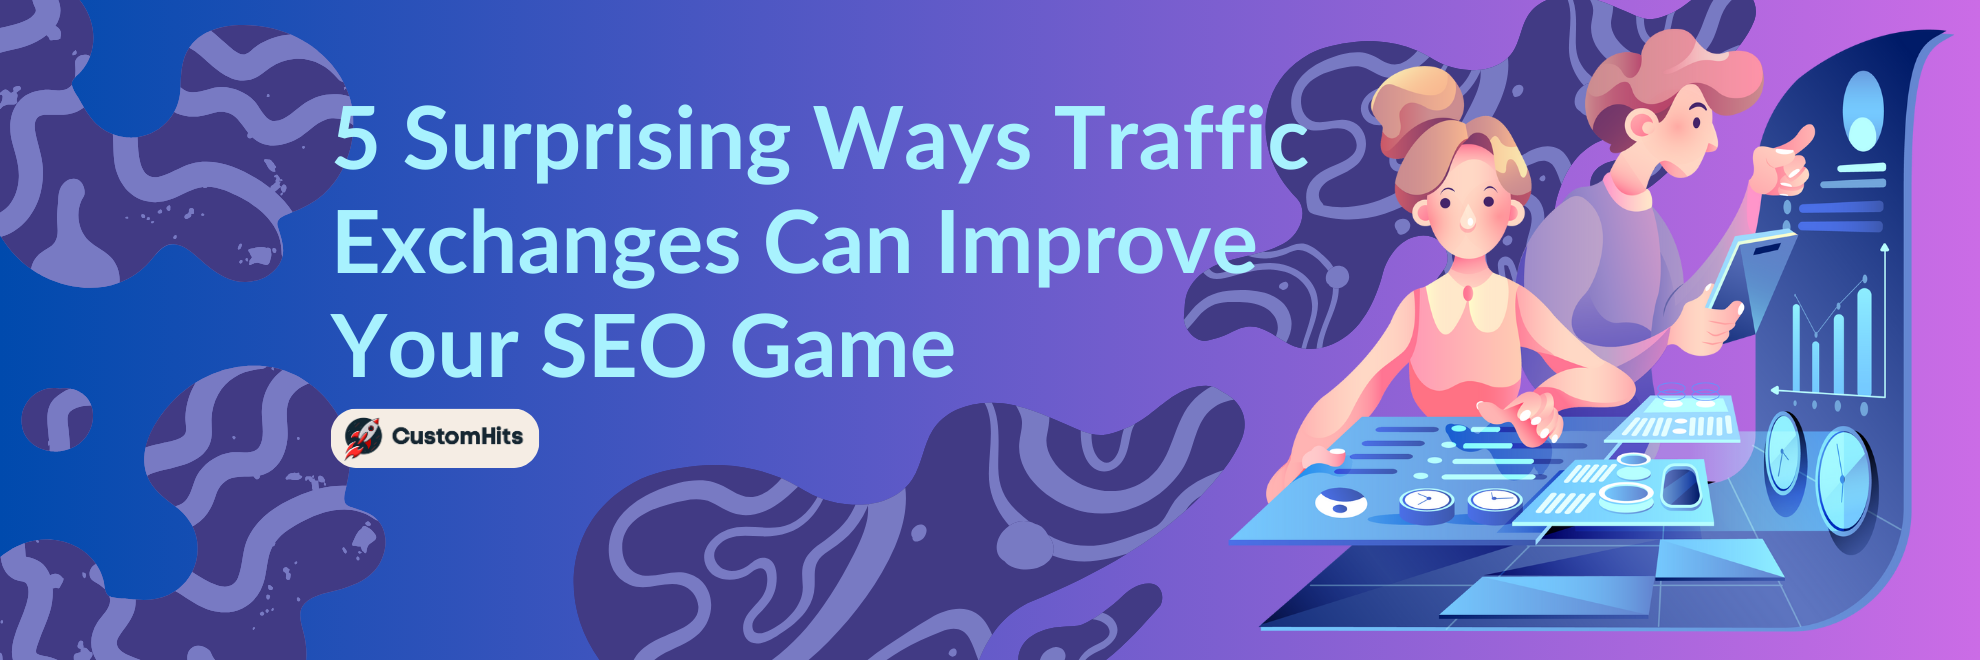 5 Surprising Ways Traffic Exchanges Can Improve Your SEO Game